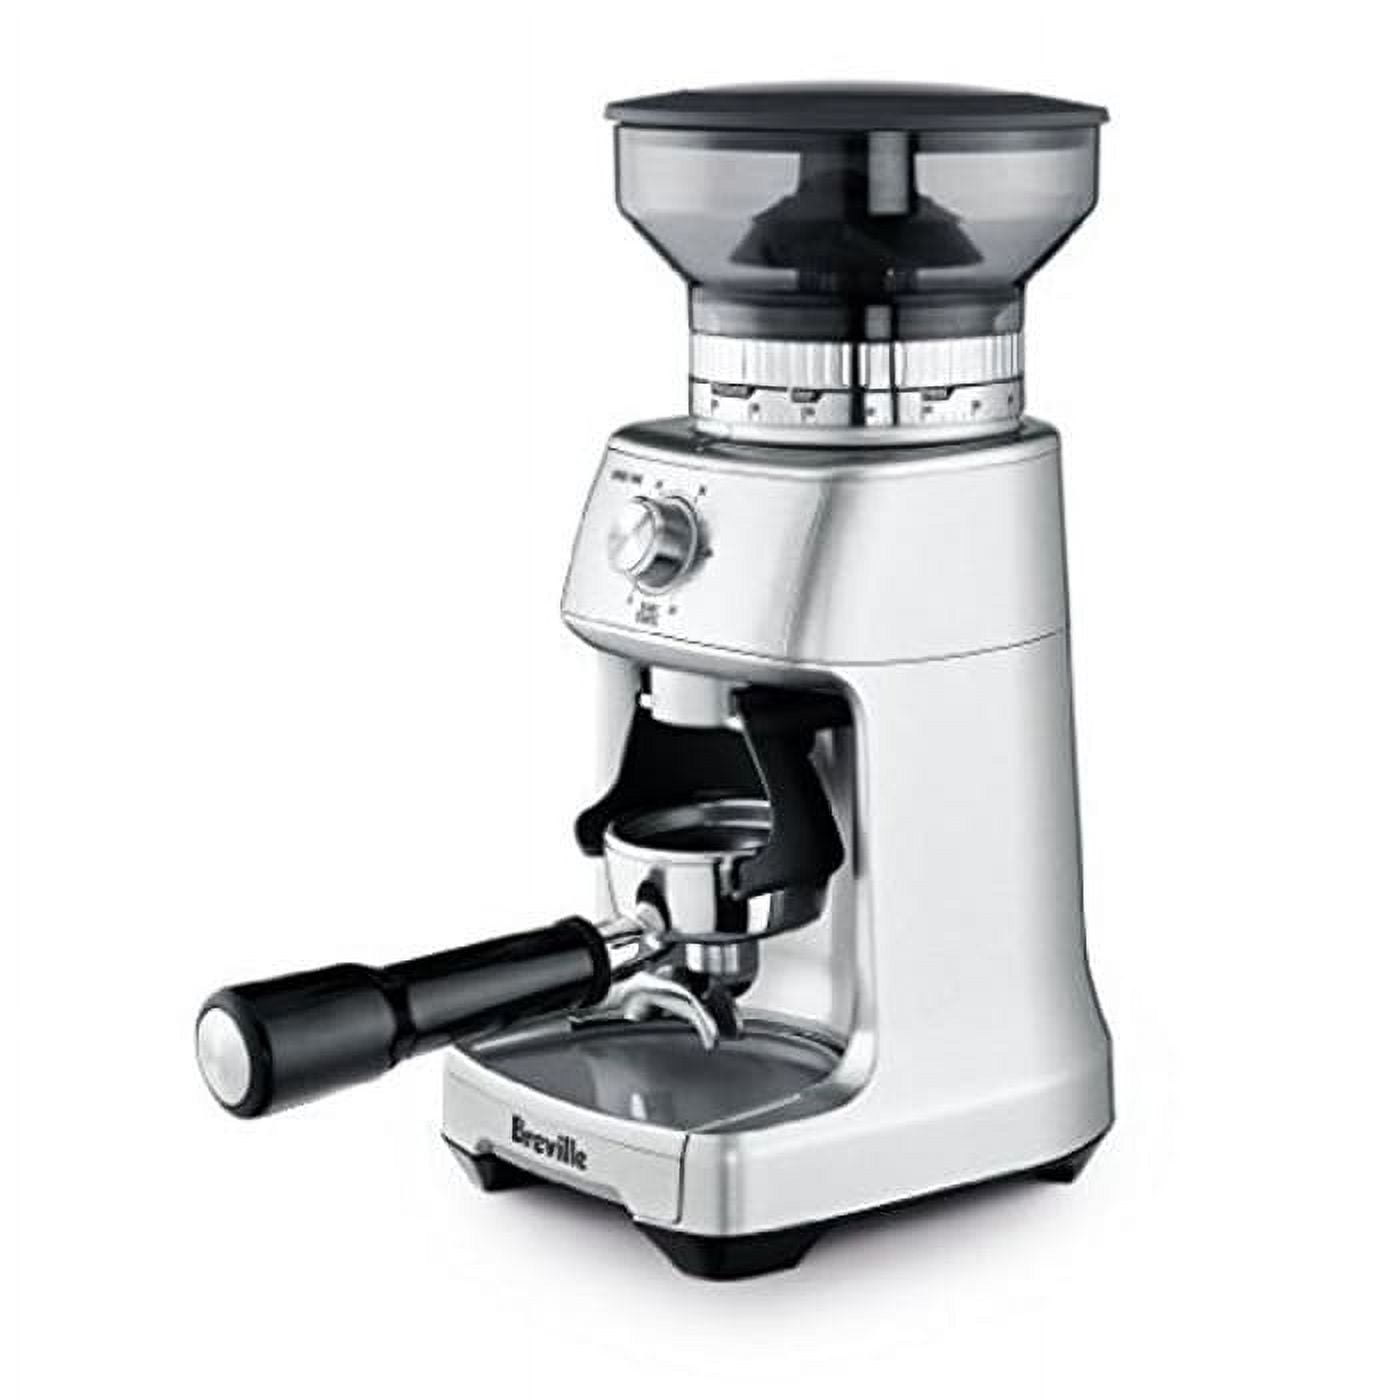  Breville Grind Control Coffee Maker, 60 ounces